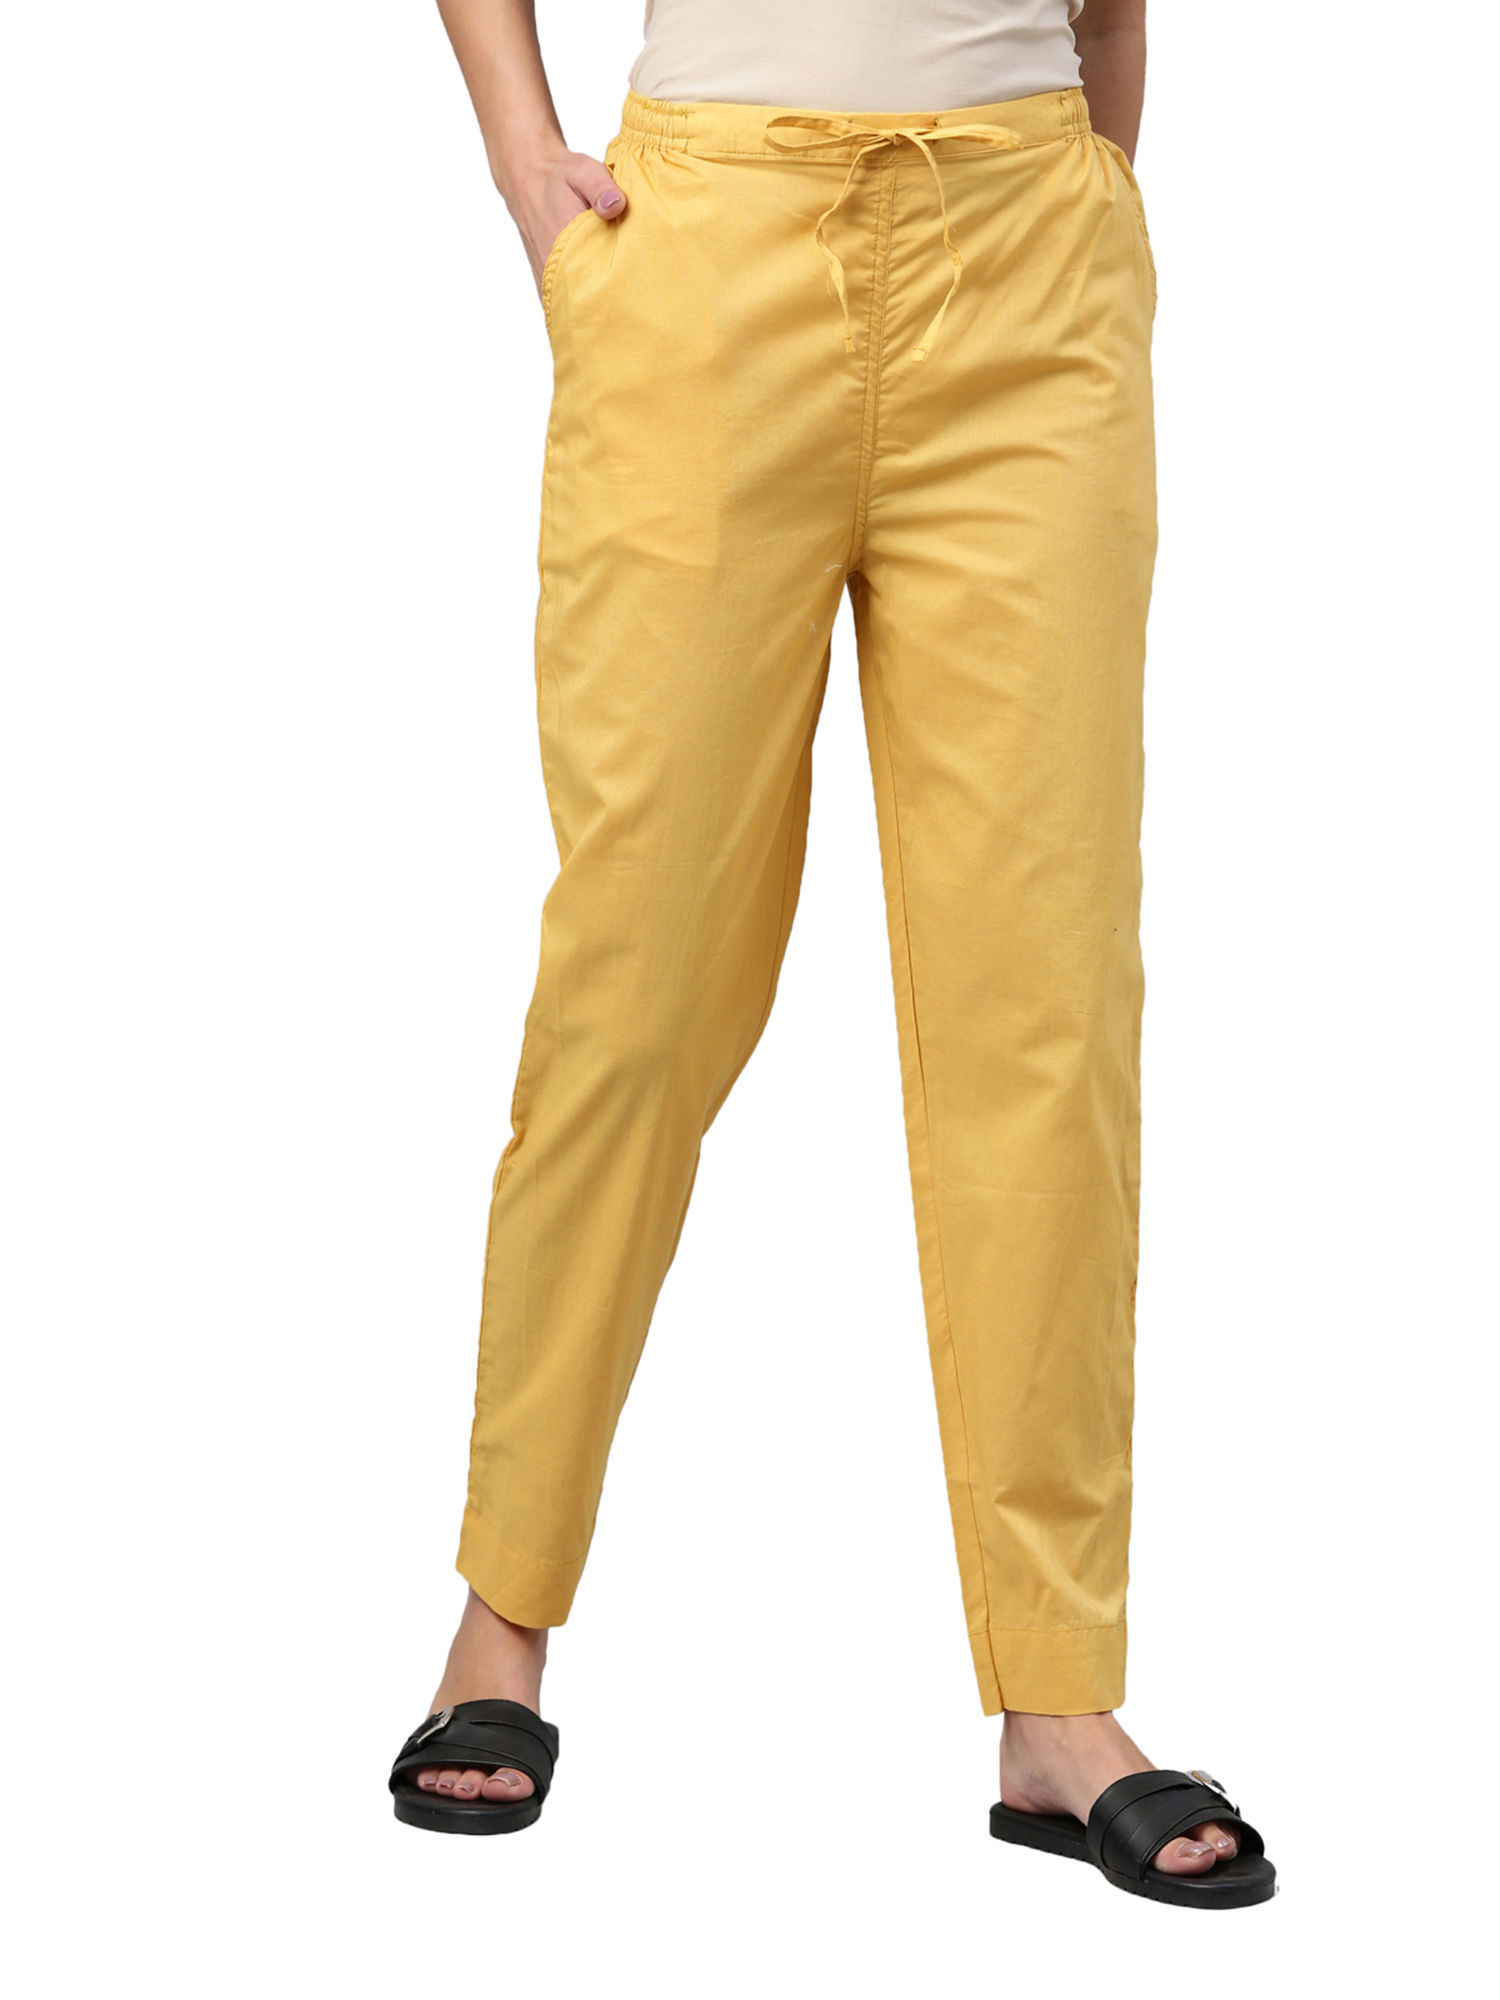 Women Solid Light Mustard Viscose Mid Rise Casual Pants